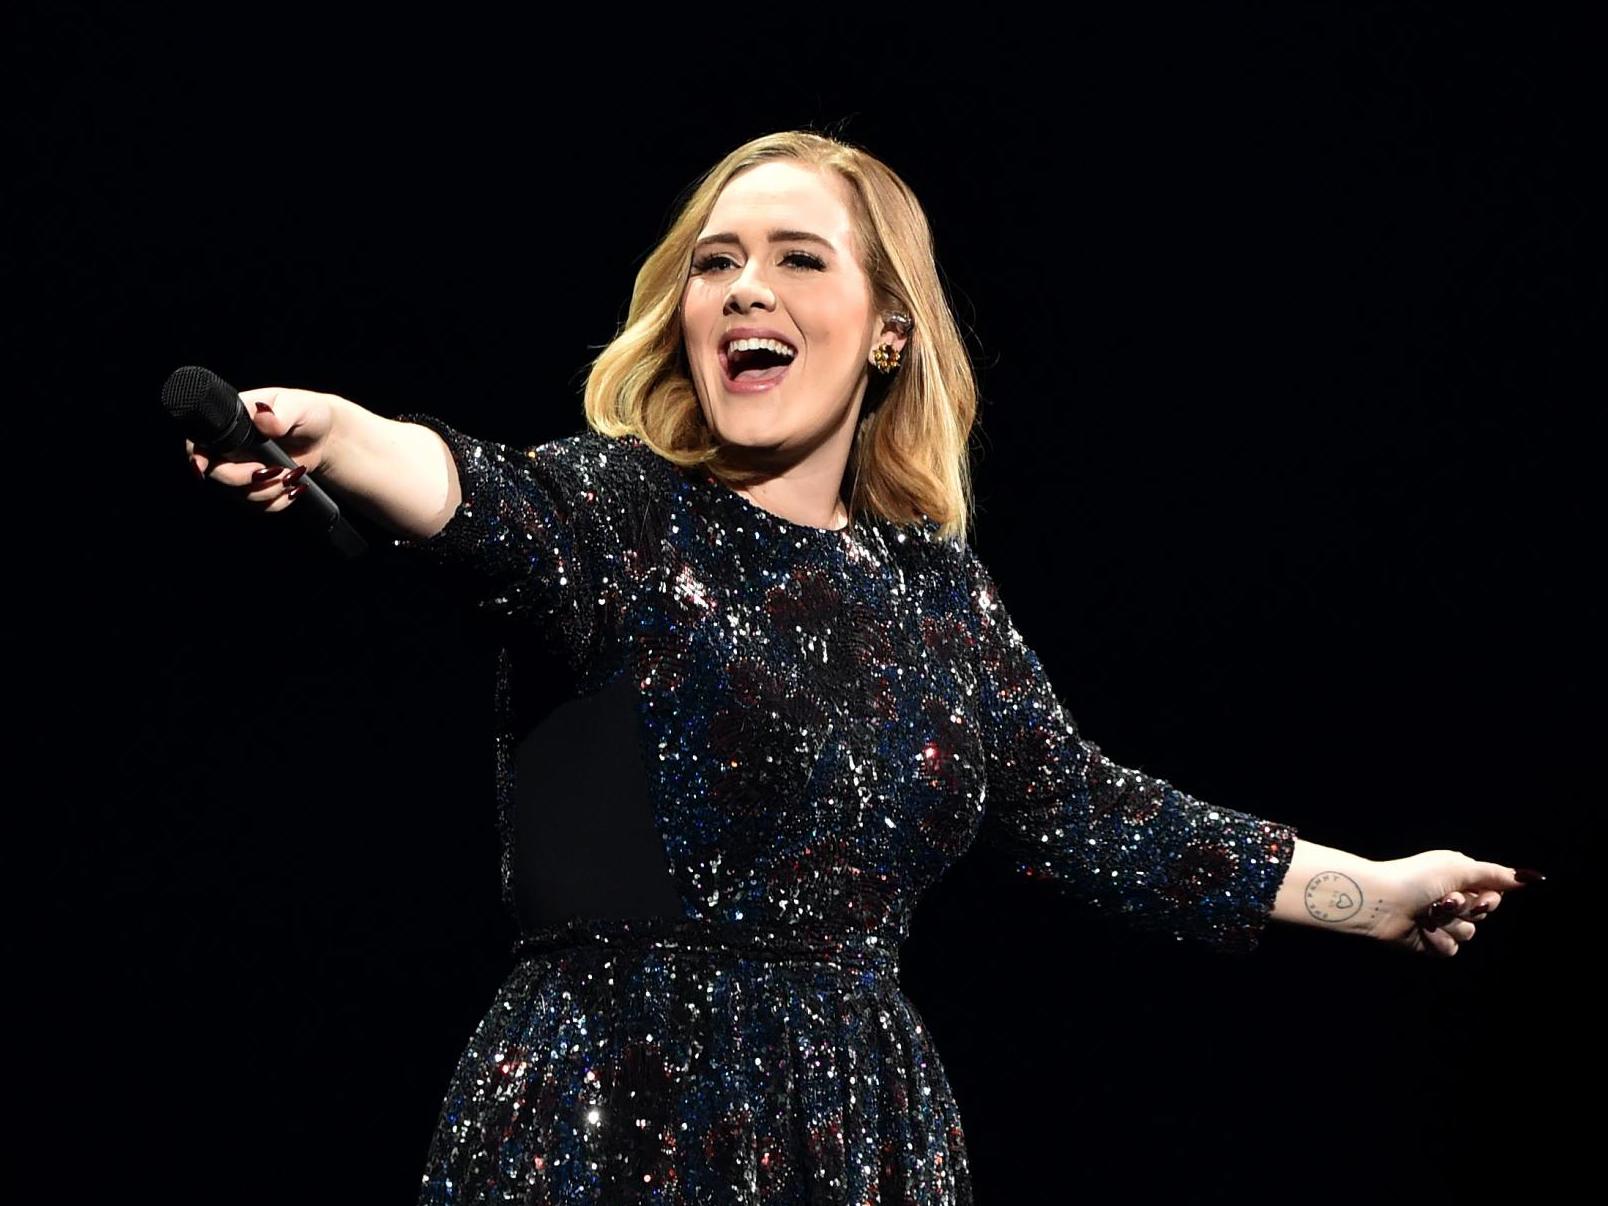 Adele Seen To Shaved Her All Hair Off in New Picture